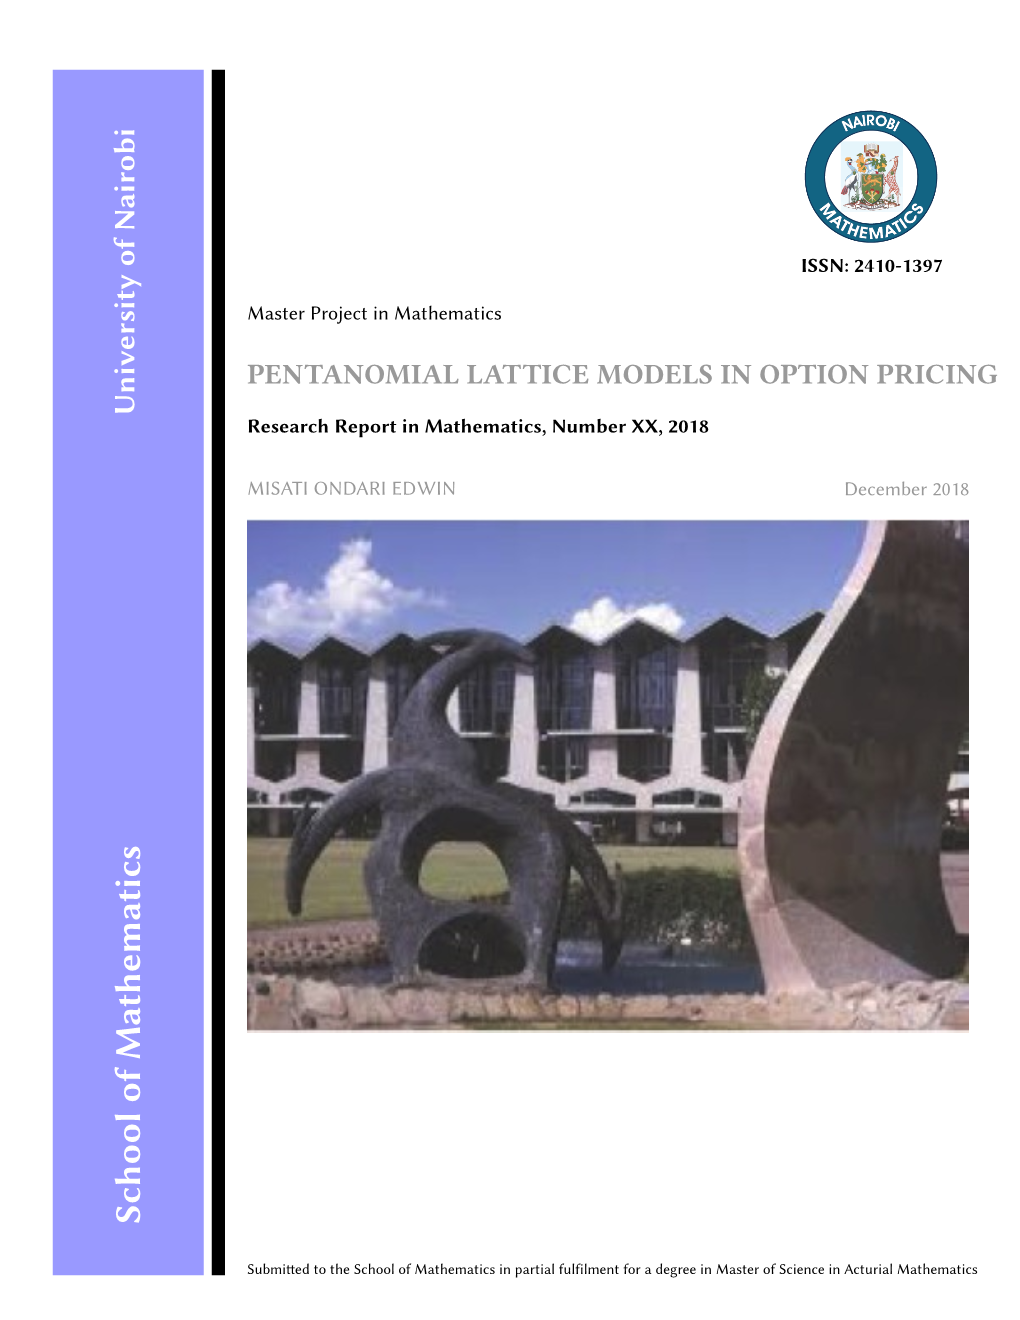 PENTANOMIAL LATTICE MODELS in OPTION PRICING Research Report in Mathematics, Number XX, 2018